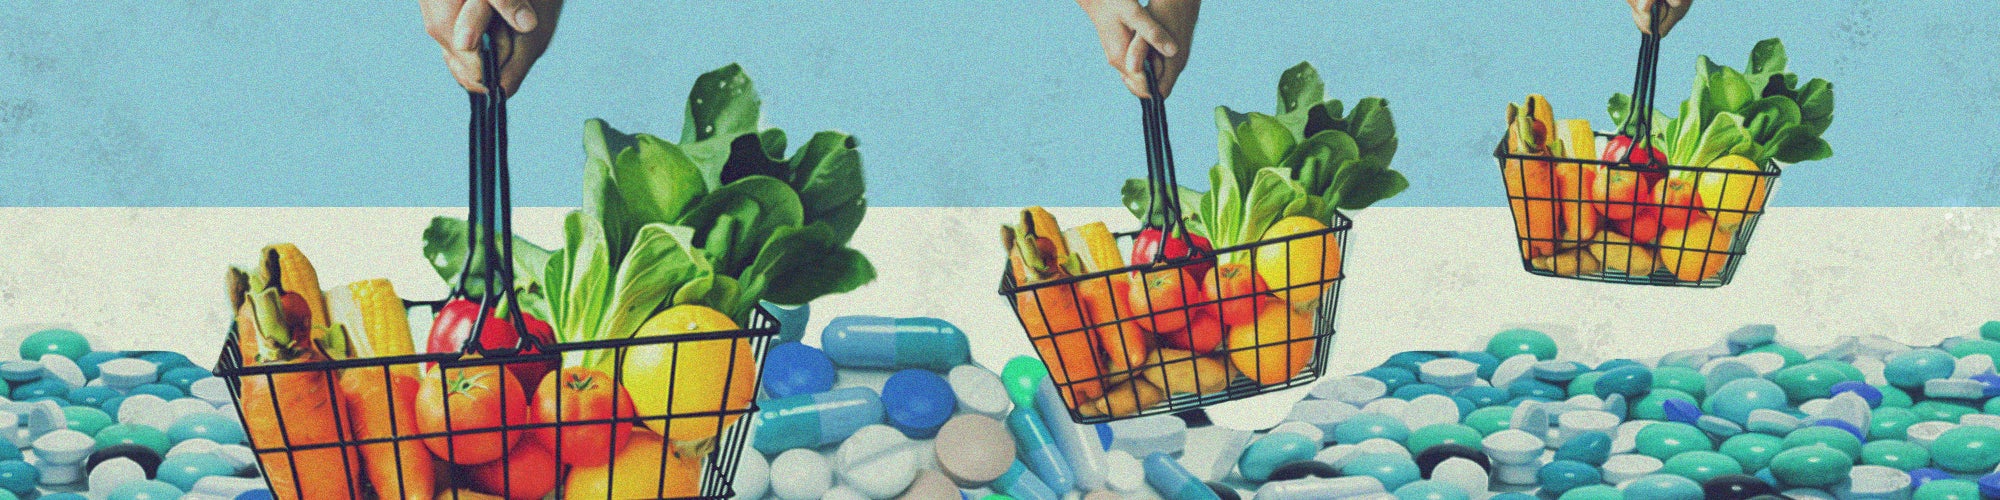 A composite image of a grocery handbasket being carried over a sea of blue-tinted supplements